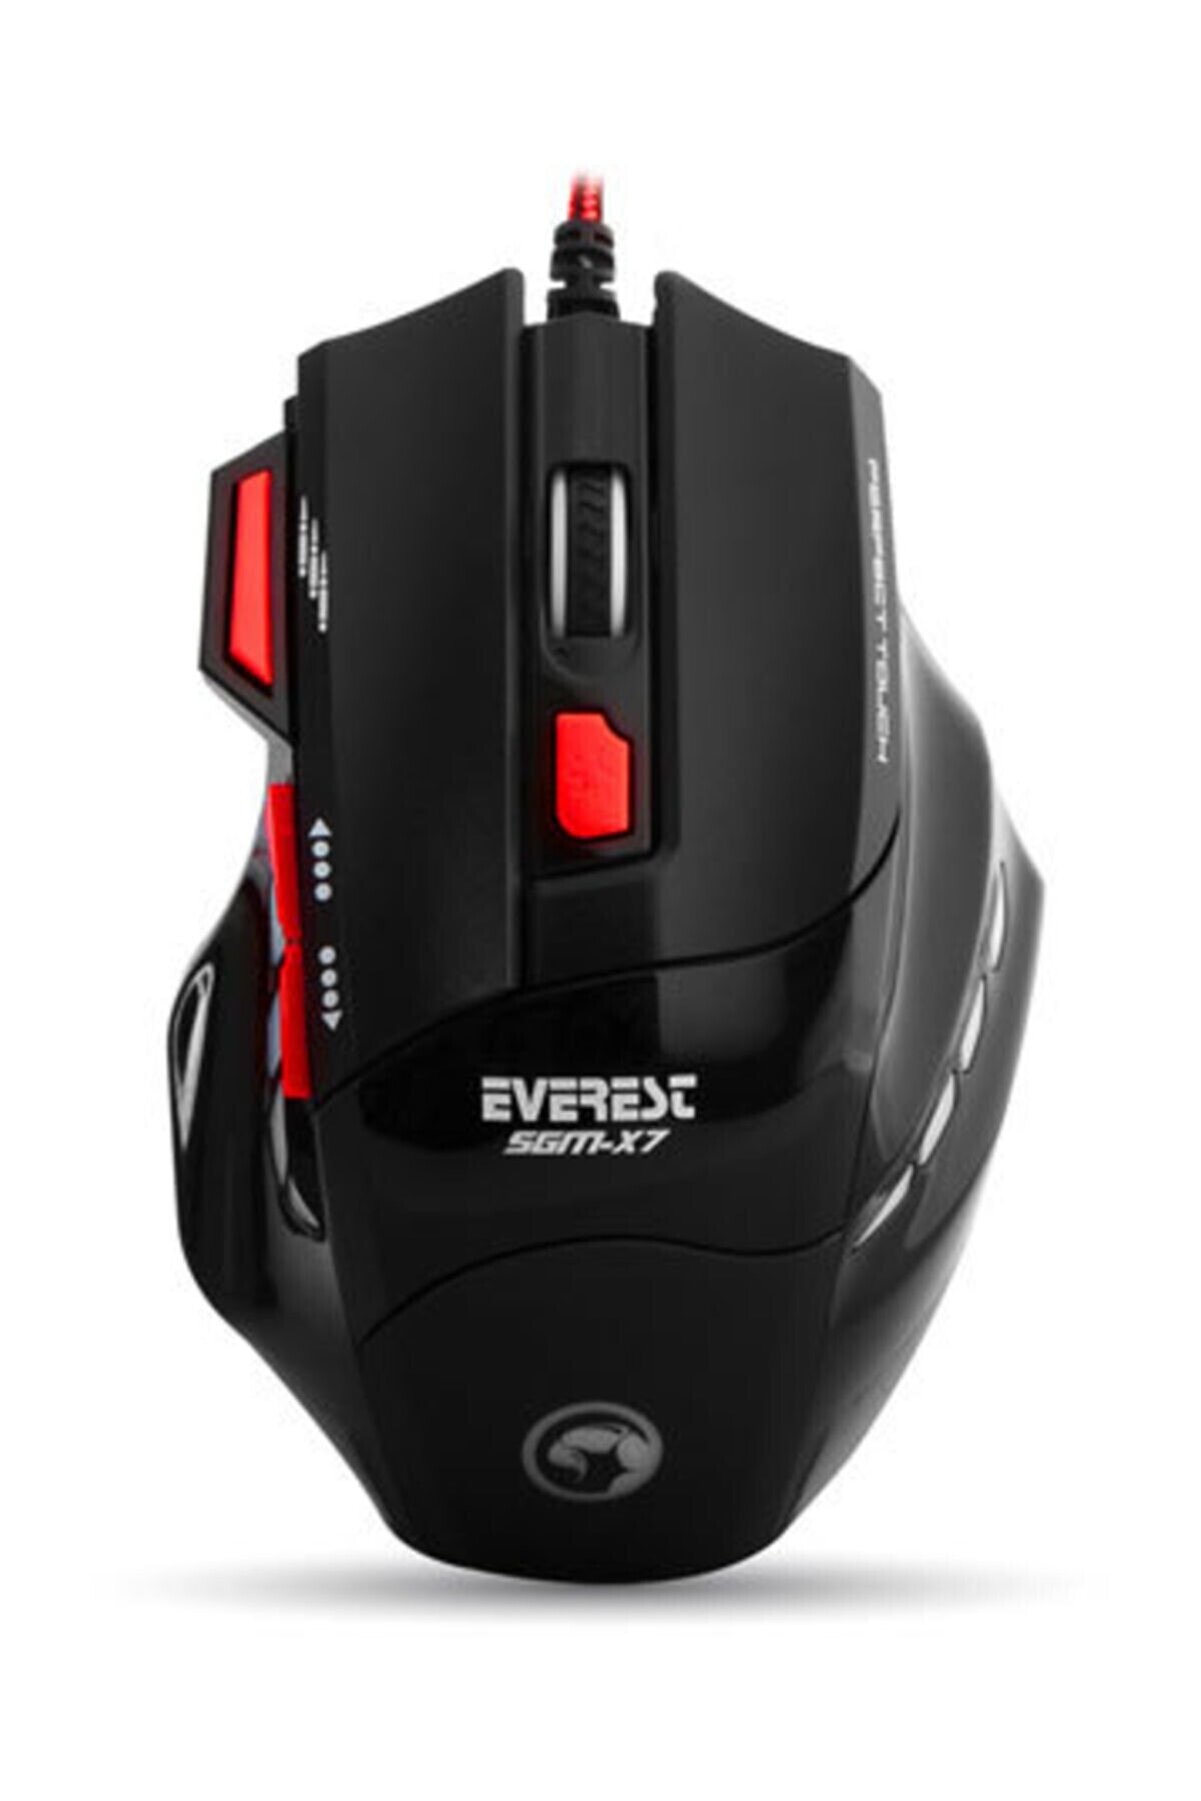 Everest SGM-X7 USB GAMING SIYAH MOUSE + GAMING MOUSE PAD